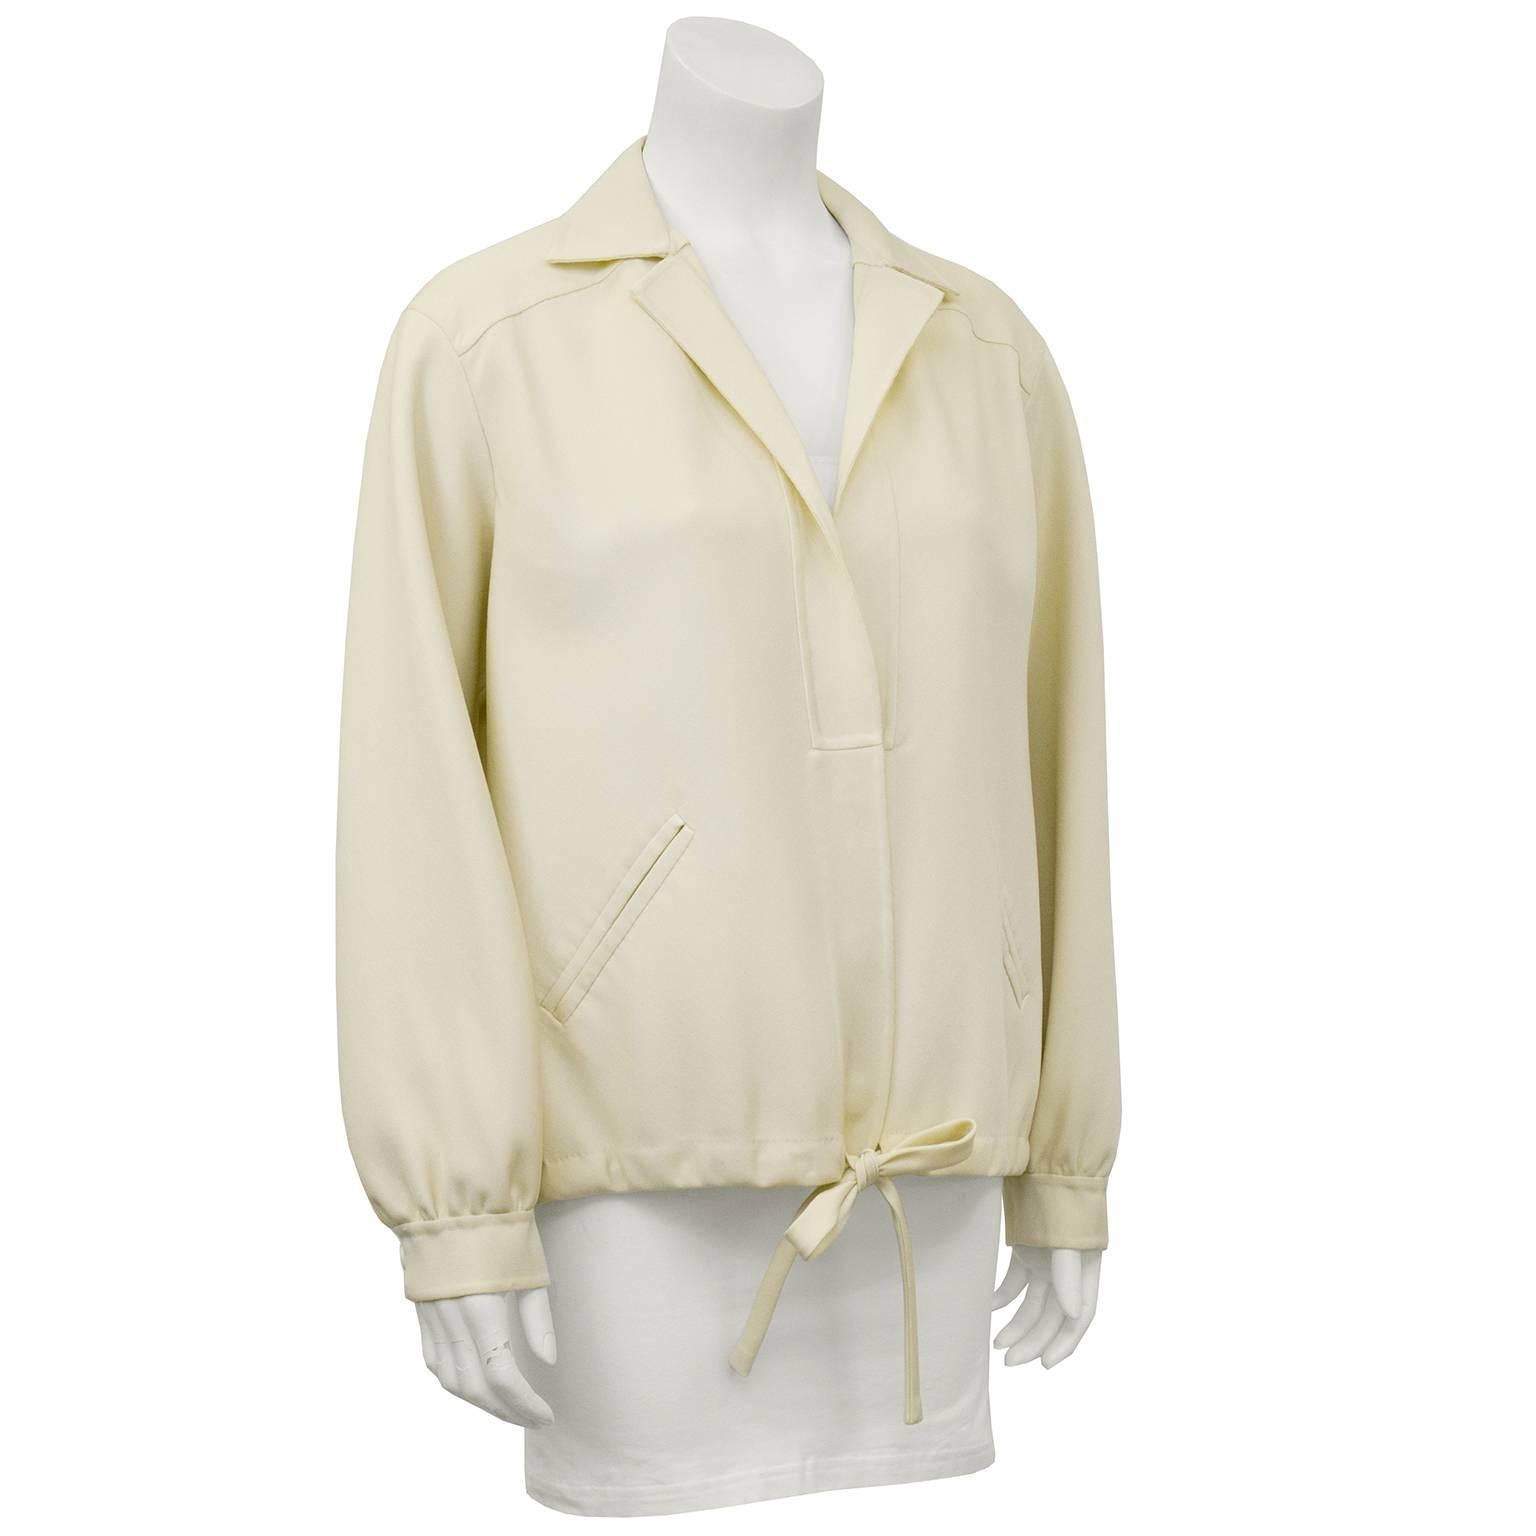 Mila Schon lightweight cream wool jacket dating from the 1970s. Very current blouse-on shape. Adjustable drawstring hem. Marked US size 8. Excellent vintage condition. Fits like a US 4-6.

Sleeve 19